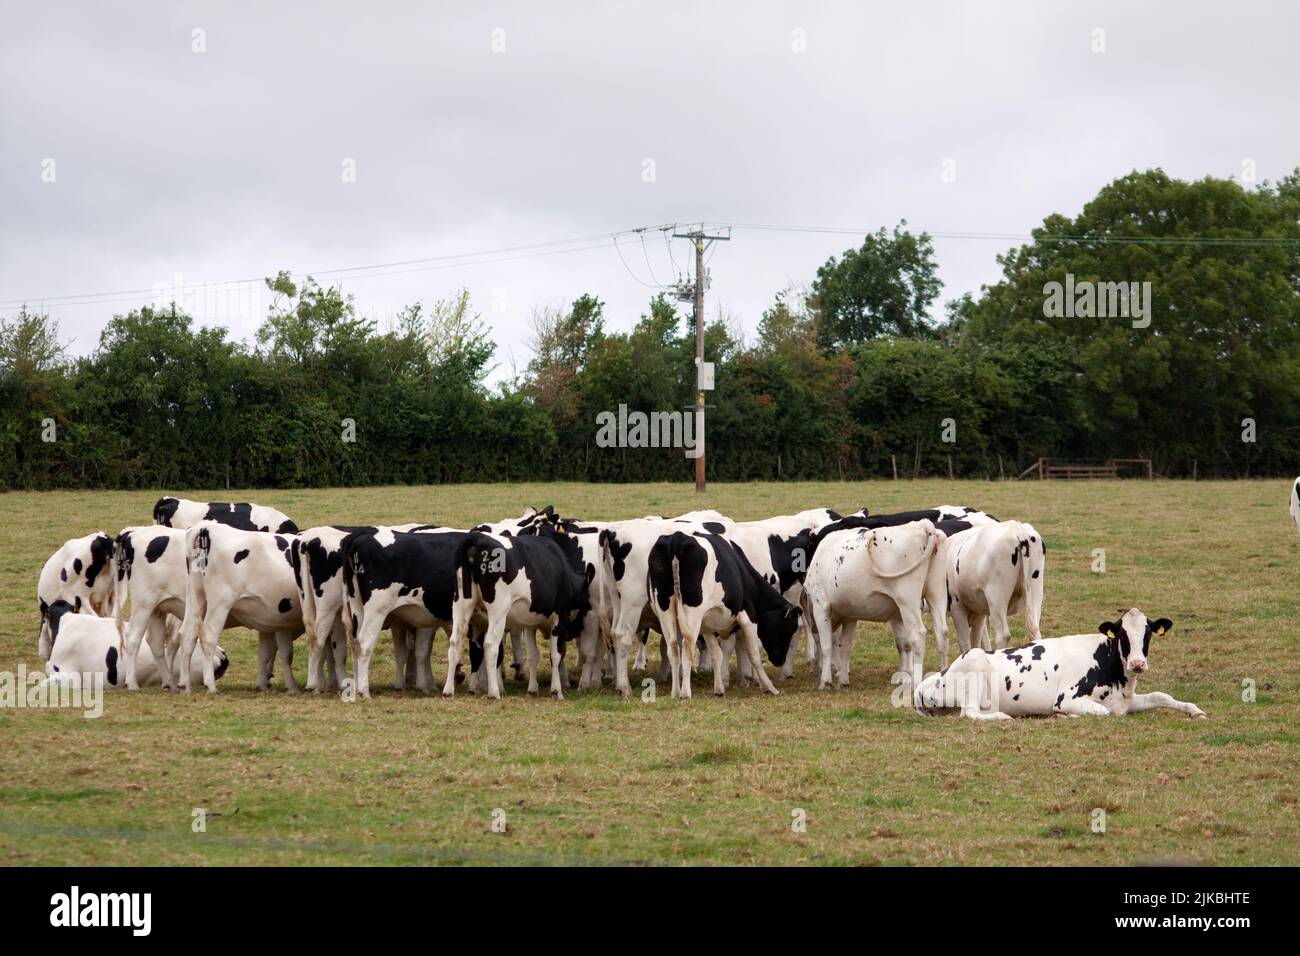 Herd of Cows in a Field Oxfordshire England uk Stock Photo